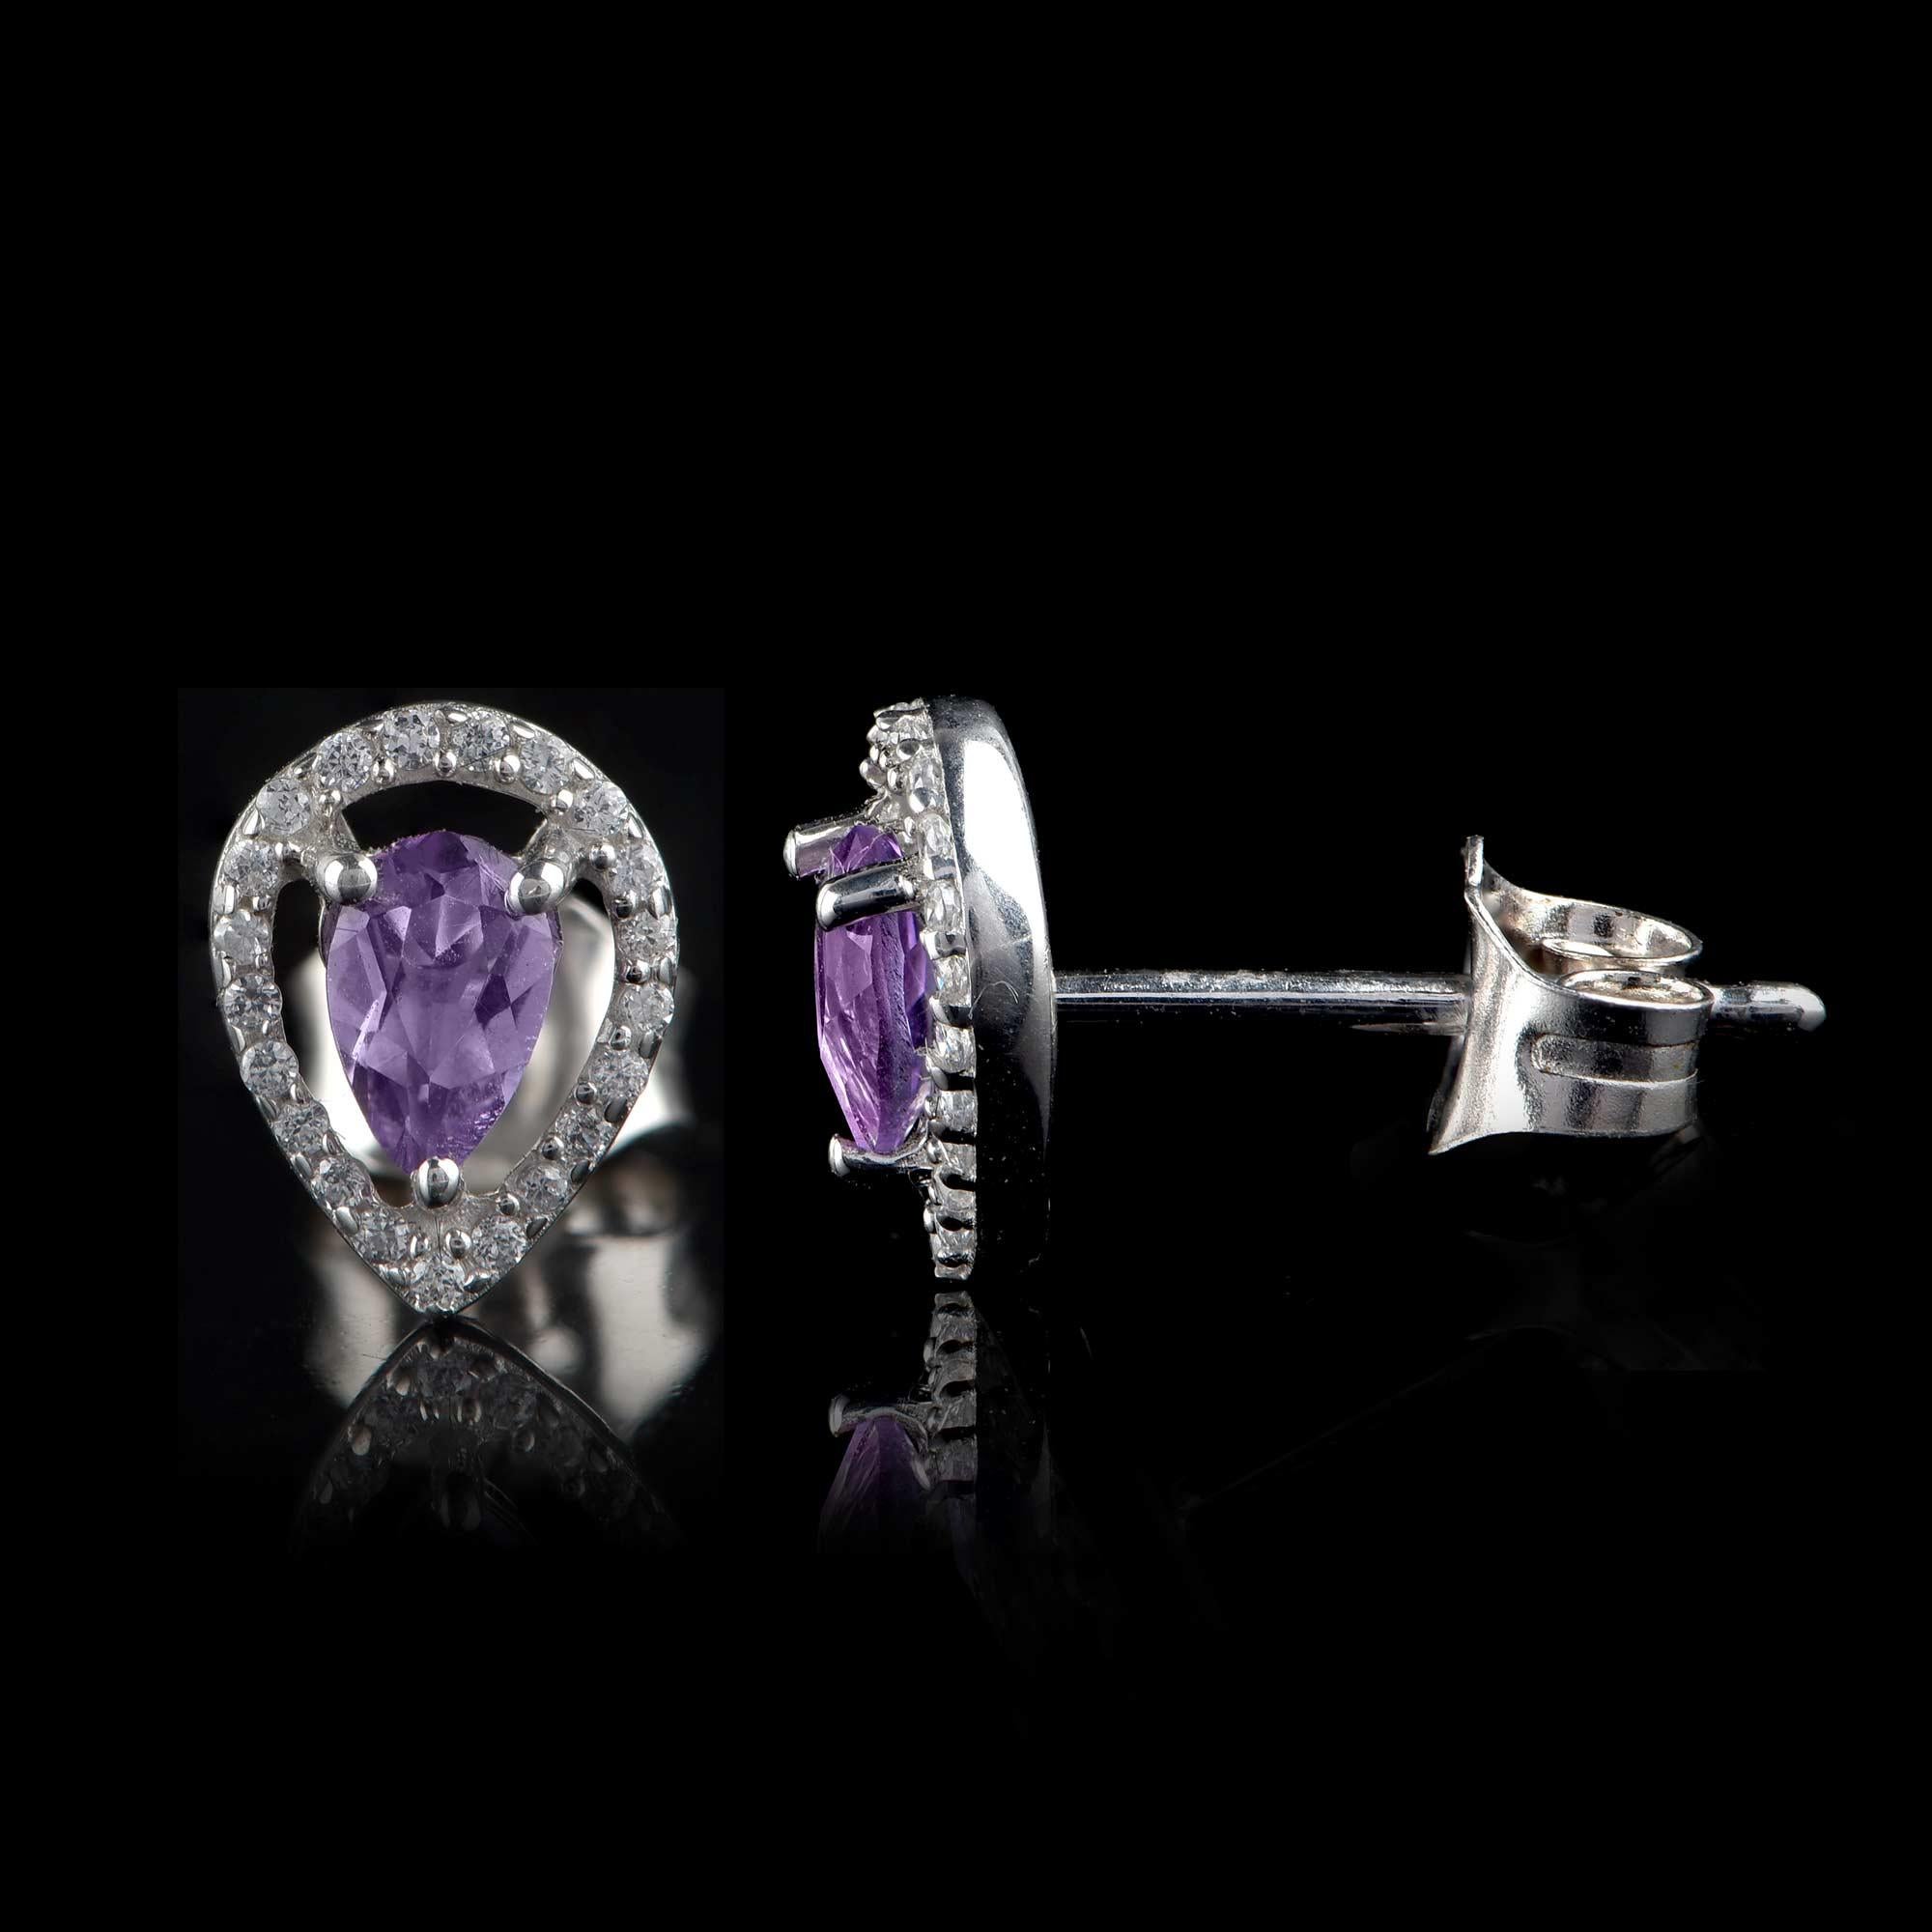 Contemporary TJD 0.12 Carat Diamond and 5X3MM Pear Amethyst 18 Karat White Gold Halo Earrings For Sale